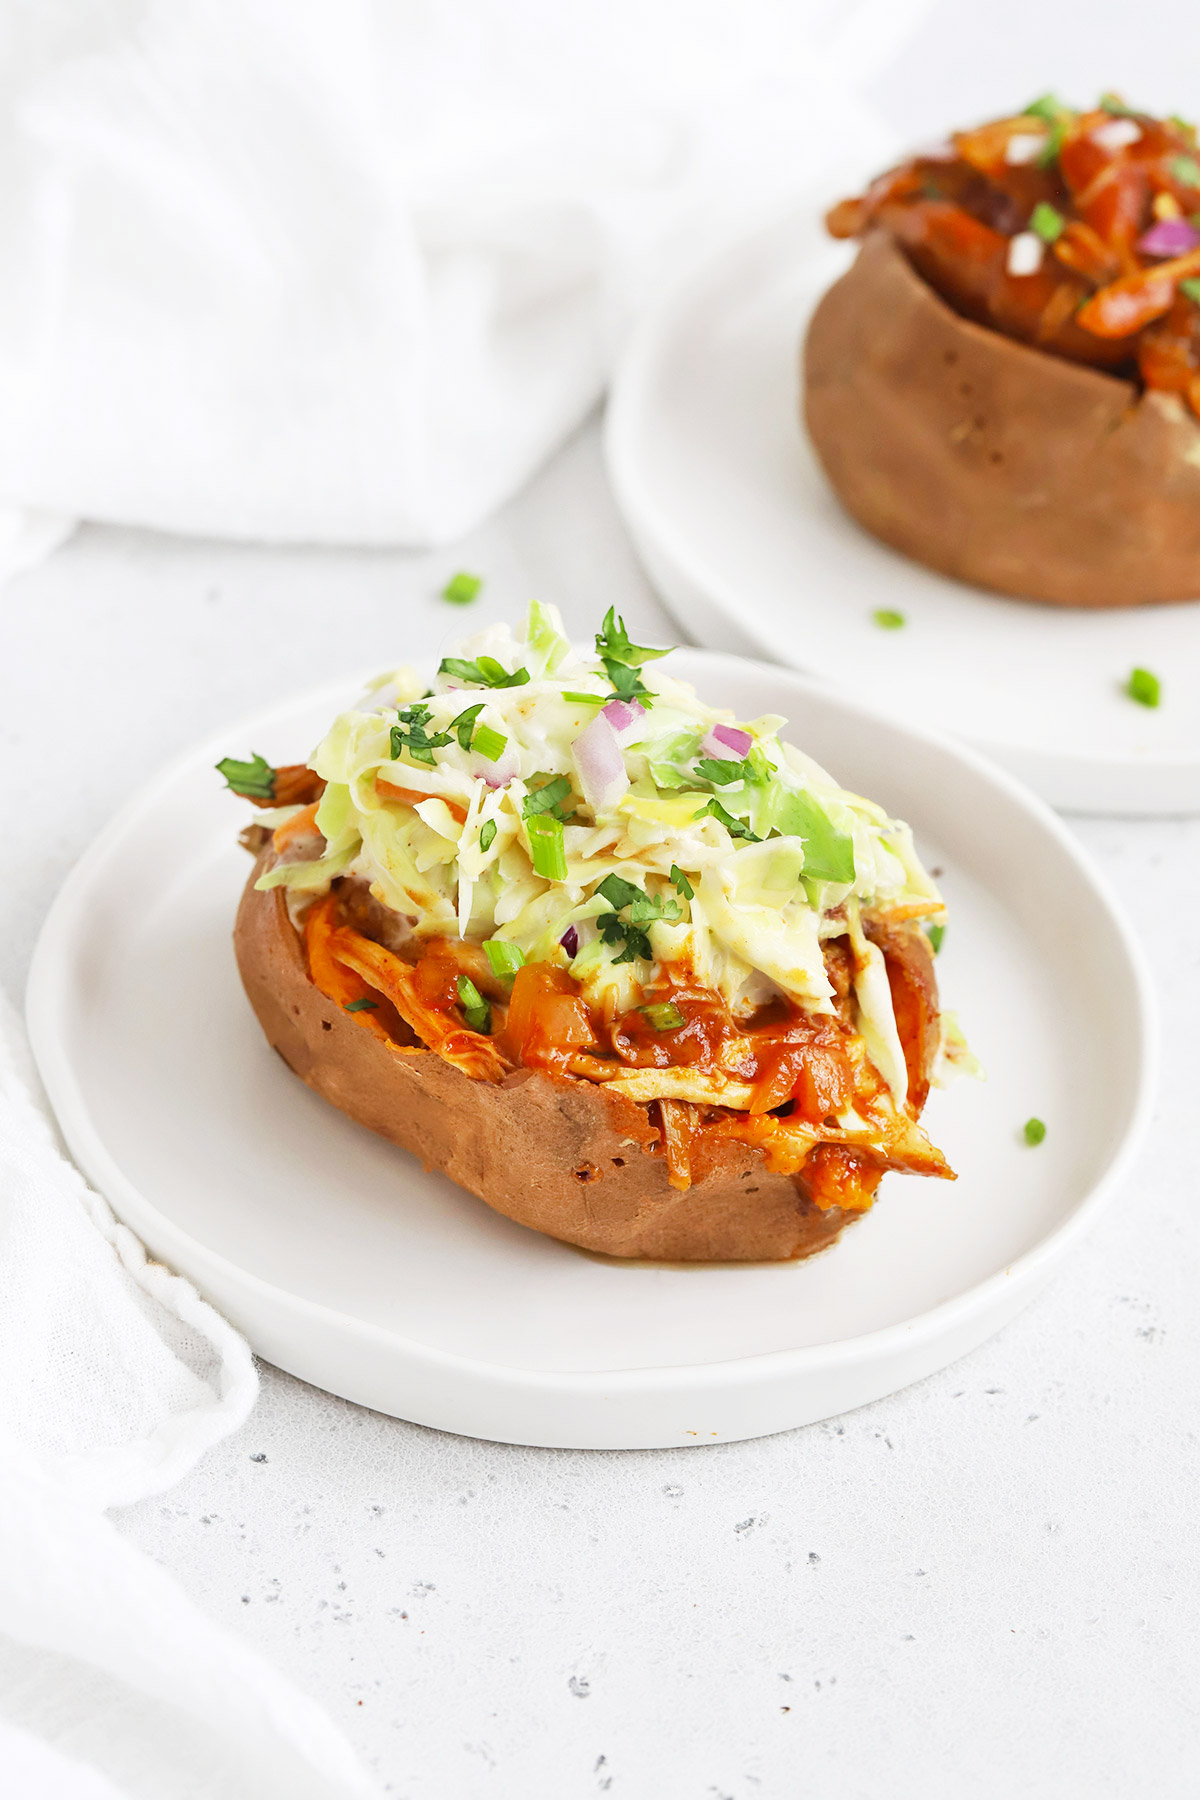 Front view of a BBQ Chicken Stuffed Sweet Potato Topped with Coleslaw on a White Background